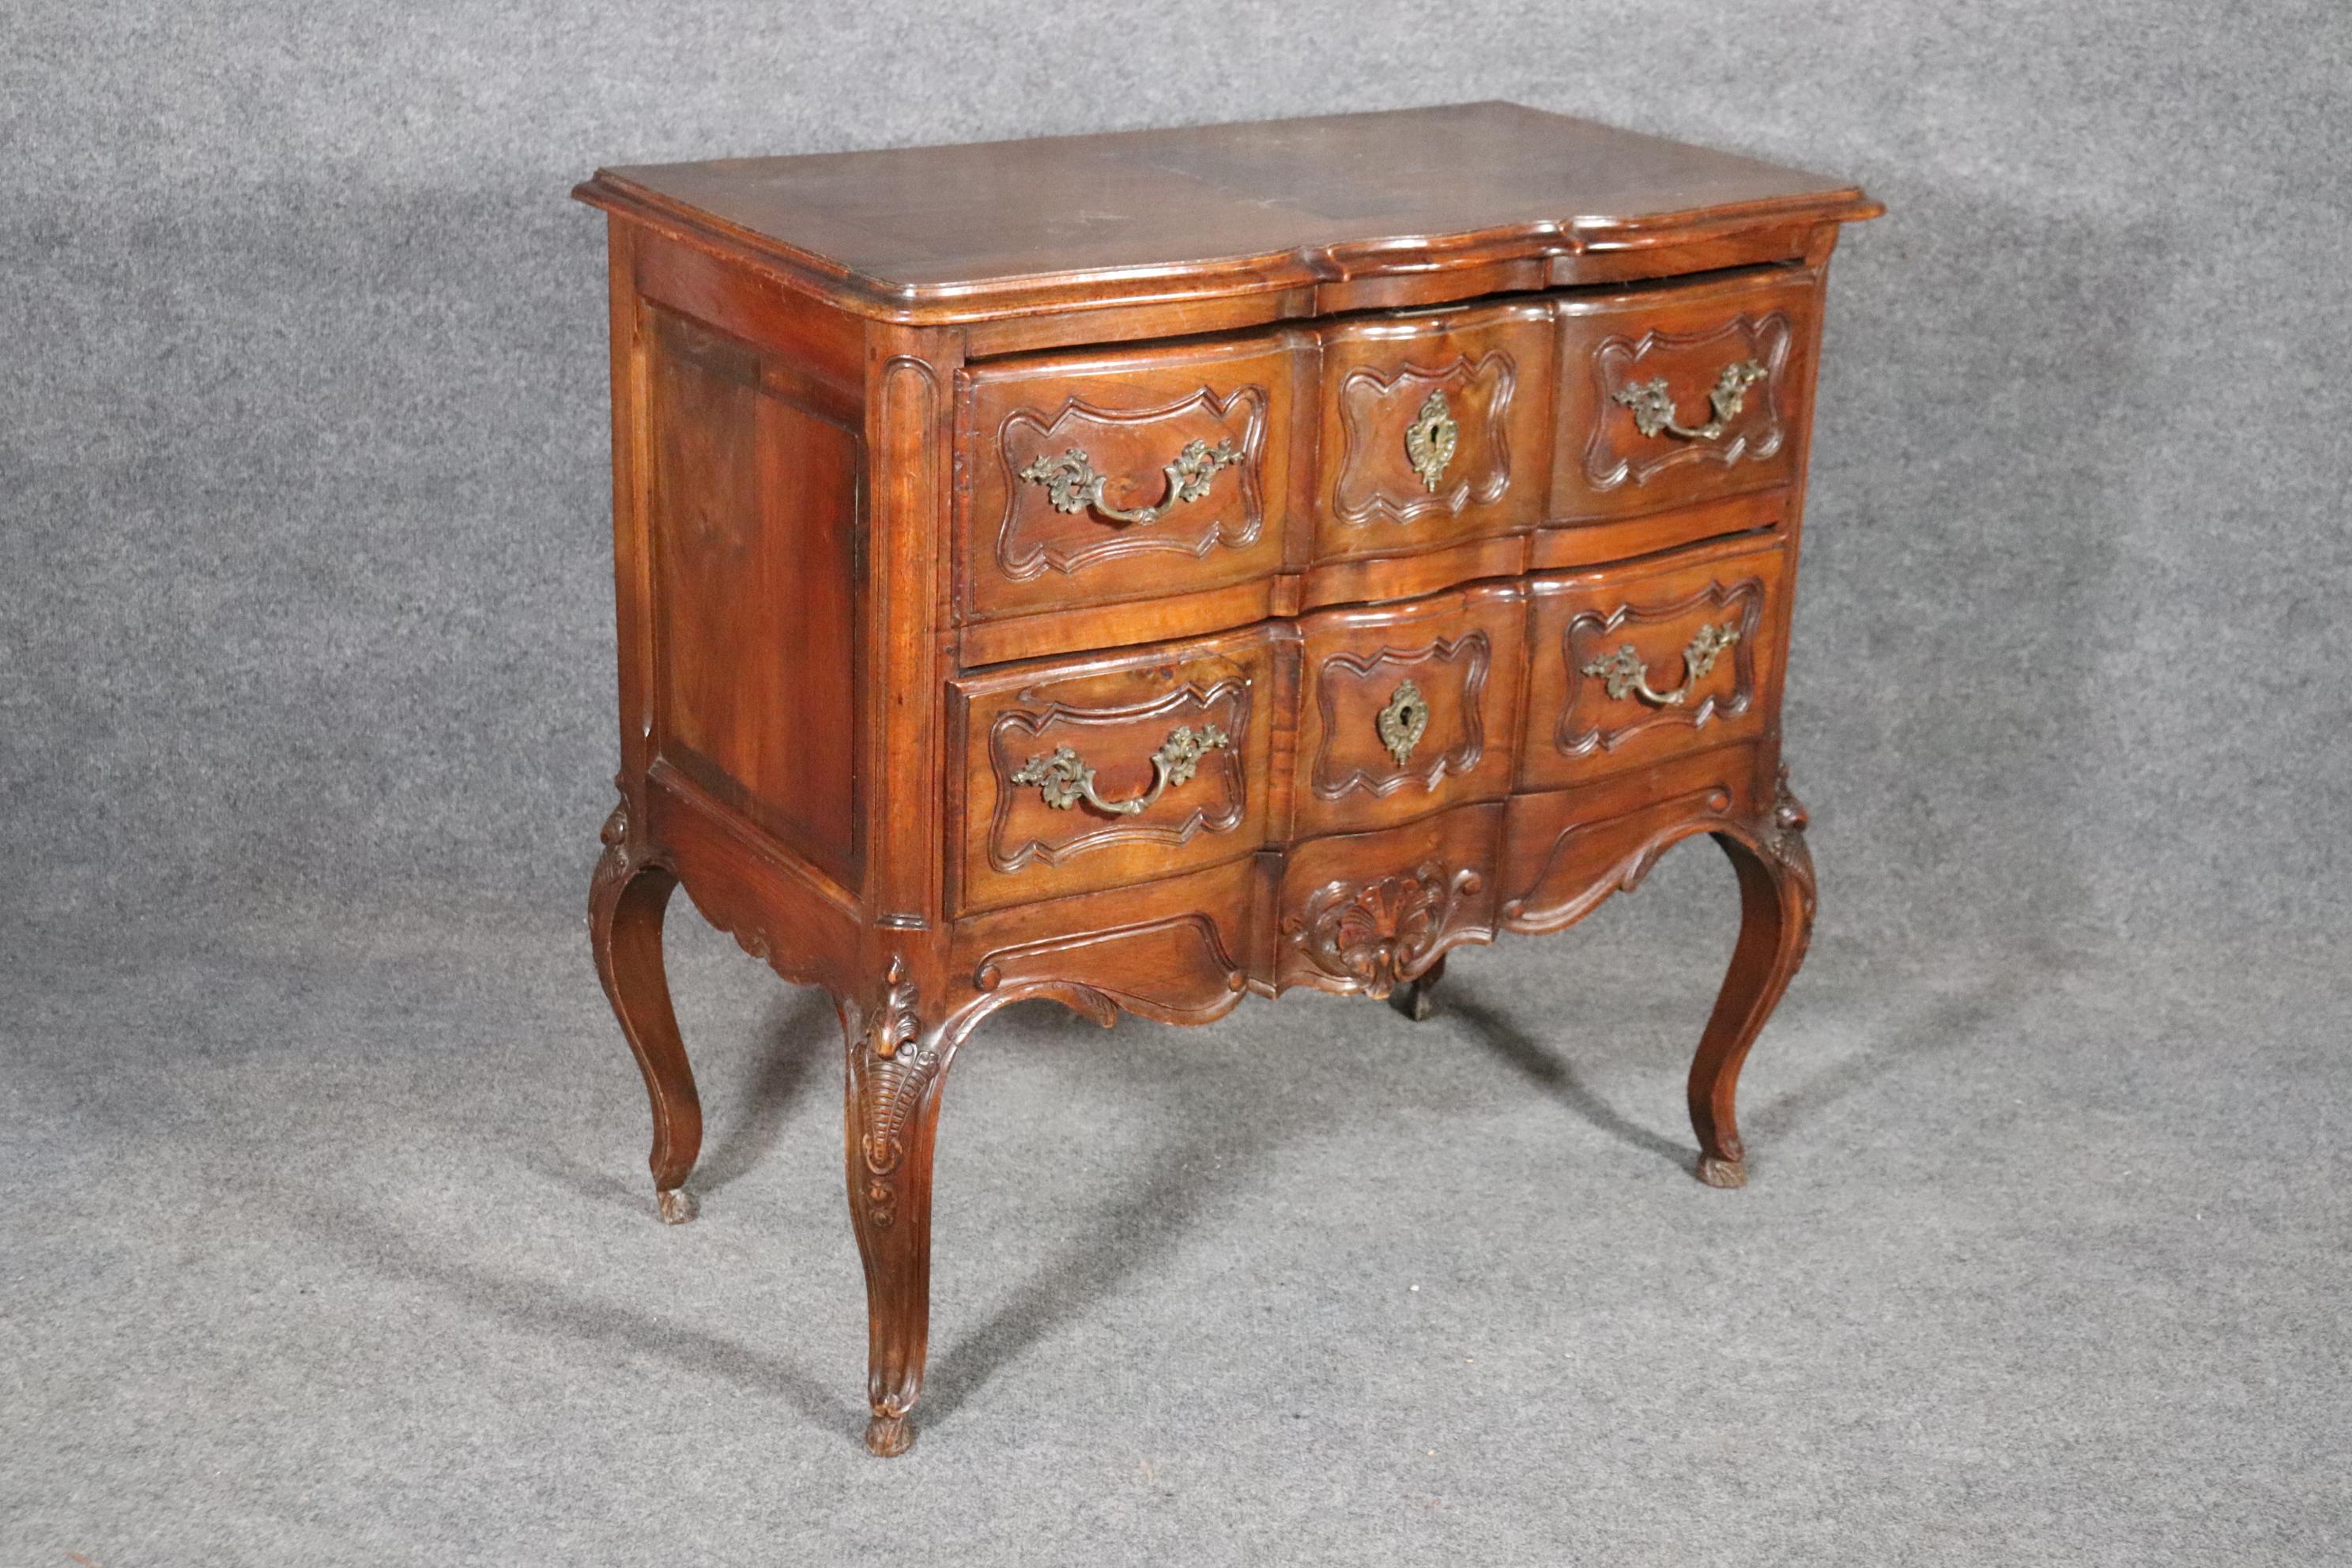 This is a handmade carved walnut French country commode. The piece dates to the 1920s era and is in good condition with minor scuffs and signs of use but nothing significant to mention. The commode does have age cracks as with most European antiques